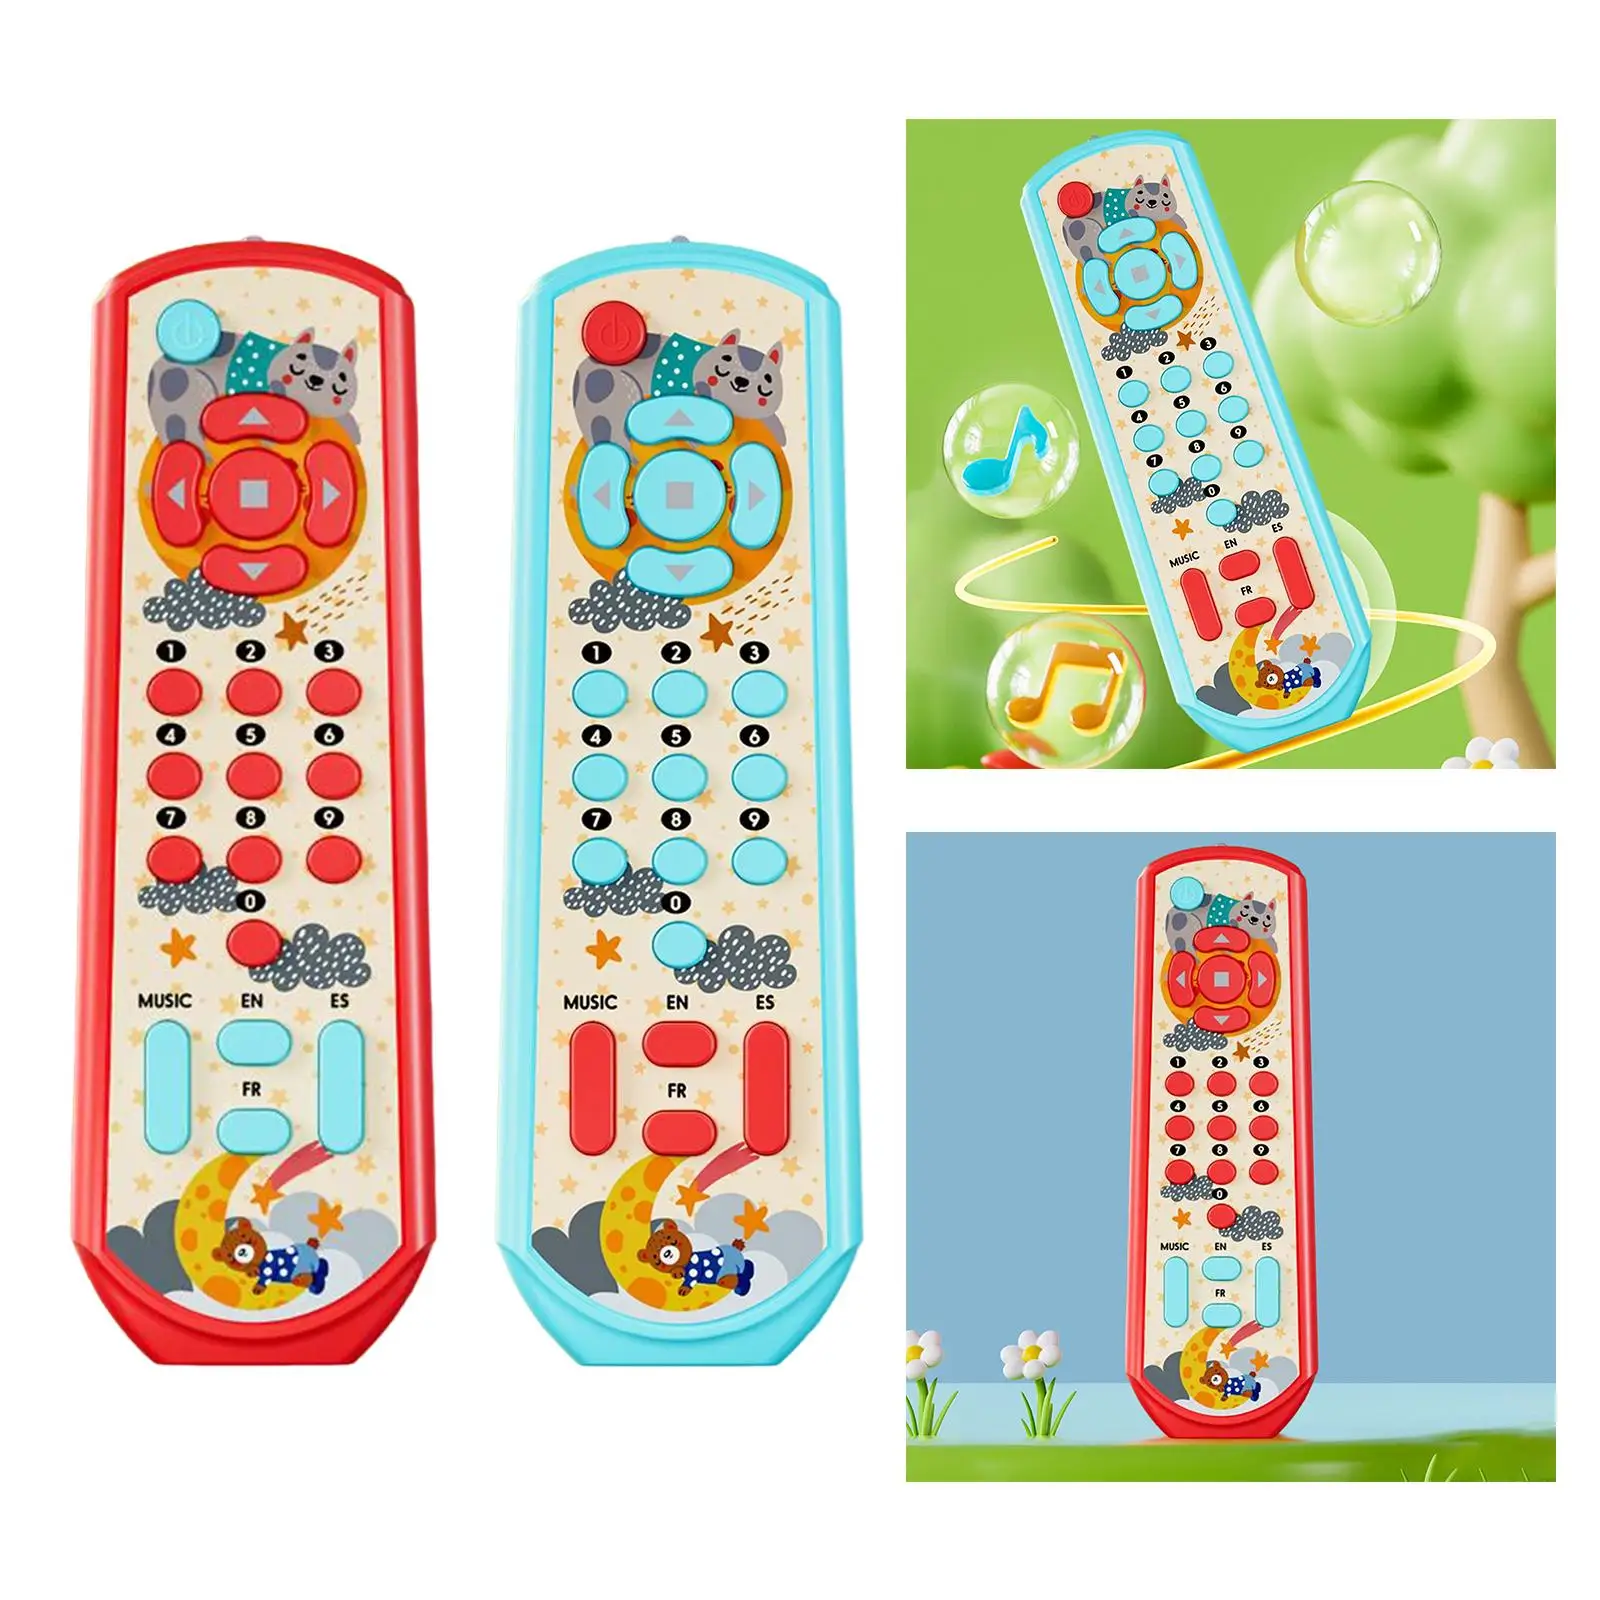 Remote Control Toys Music Education Toys Numbers Learning Machine Pretend Play with Sound for Baby Toddler Kids Children Gifts